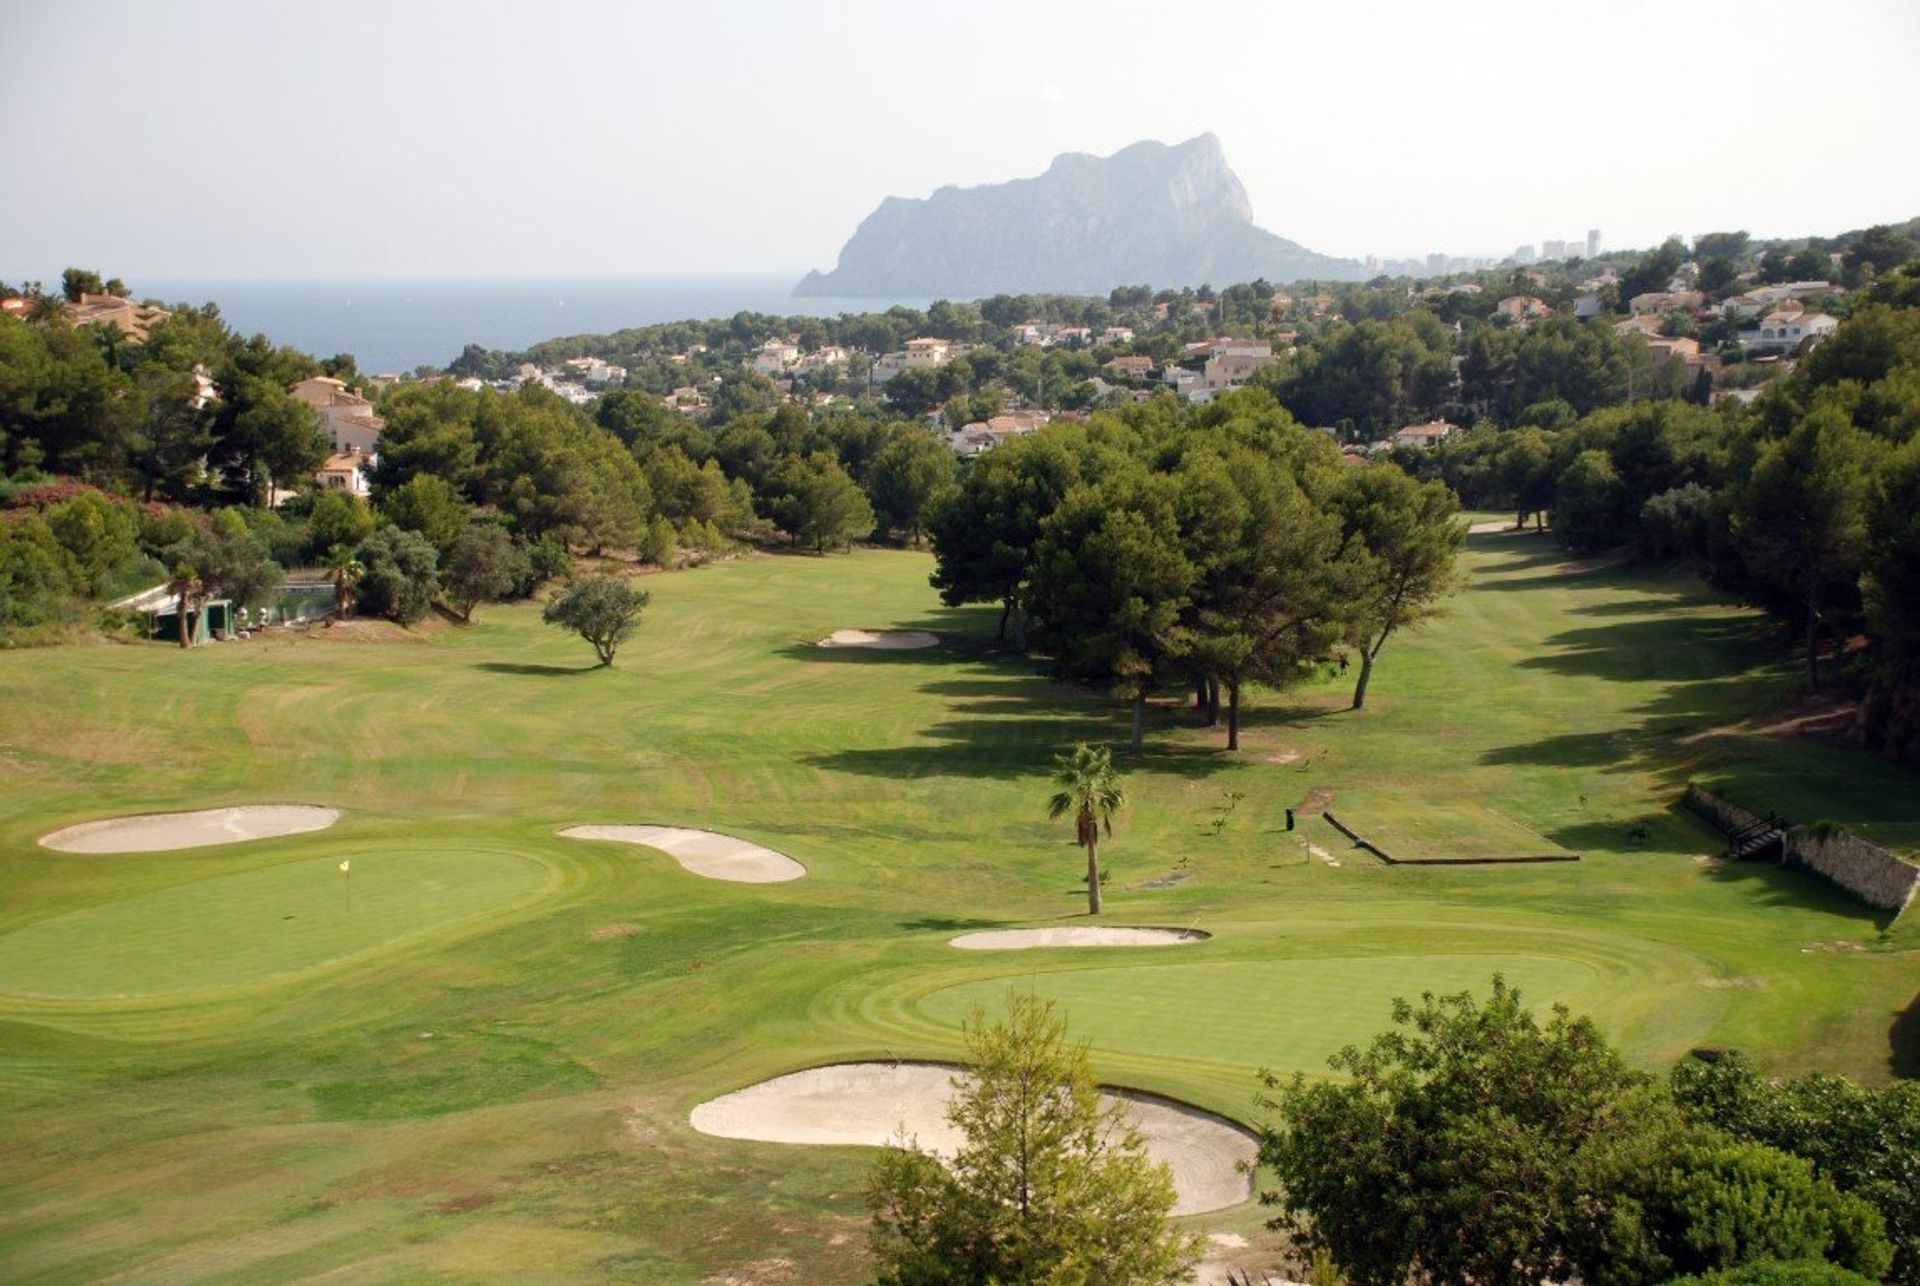 Practice your swing at one of the 8 excellent local golf courses